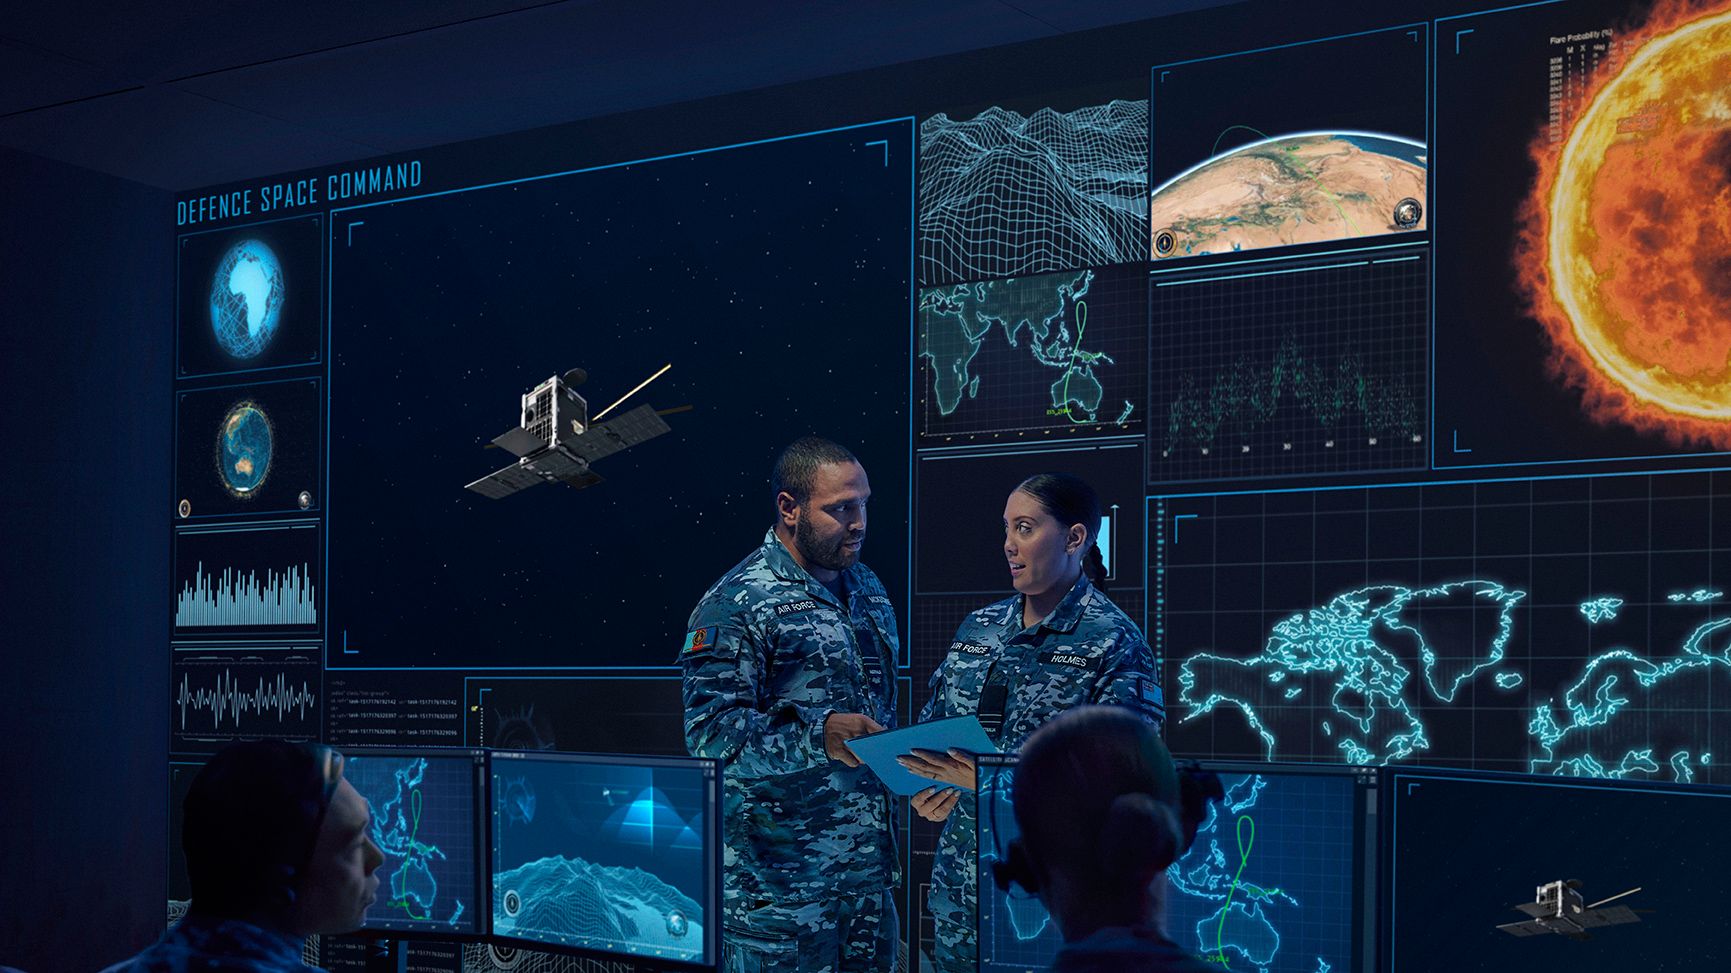 Multiple members of the Air Force standing in front of computer screens.